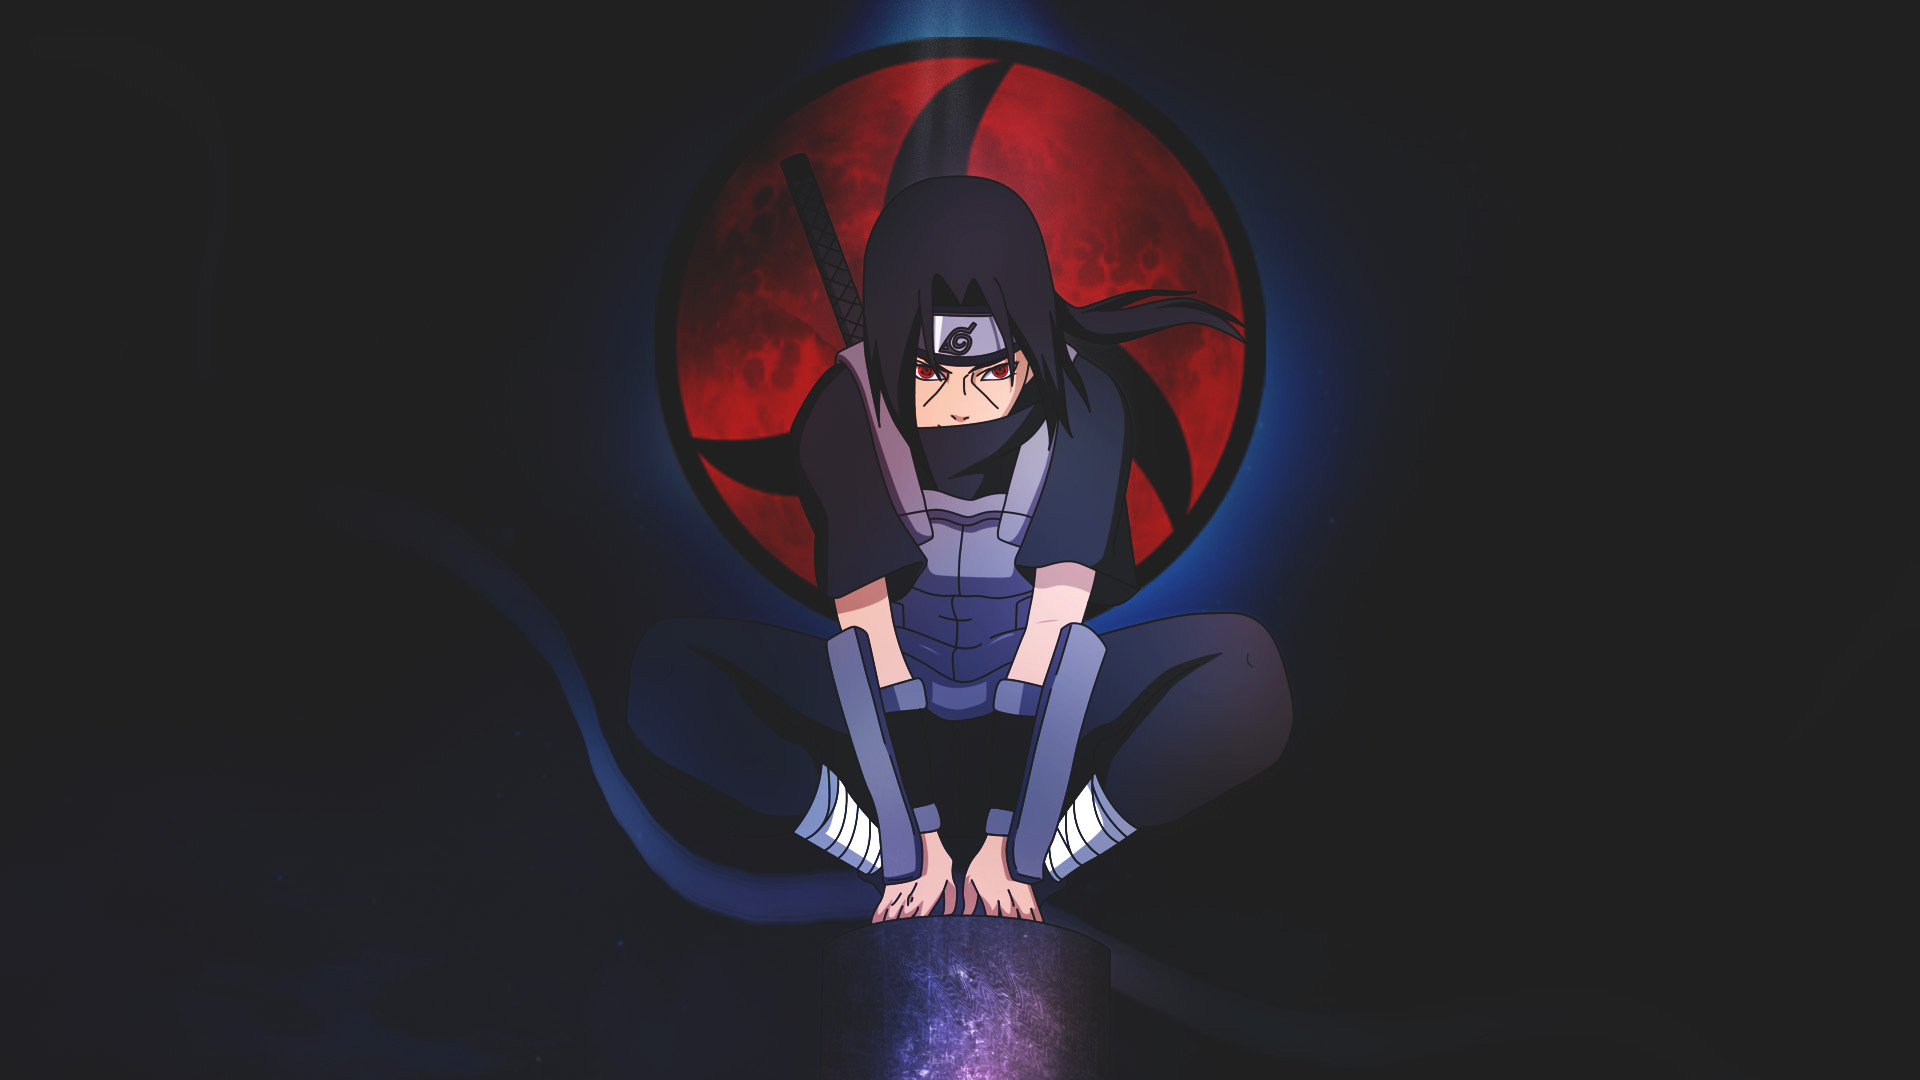 480x800 Anime Naruto Minimalism Galaxy Note,HTC Desire,Nokia Lumia 520,625  Android HD 4k Wallpapers, Images, Backgrounds, Photos and Pictures